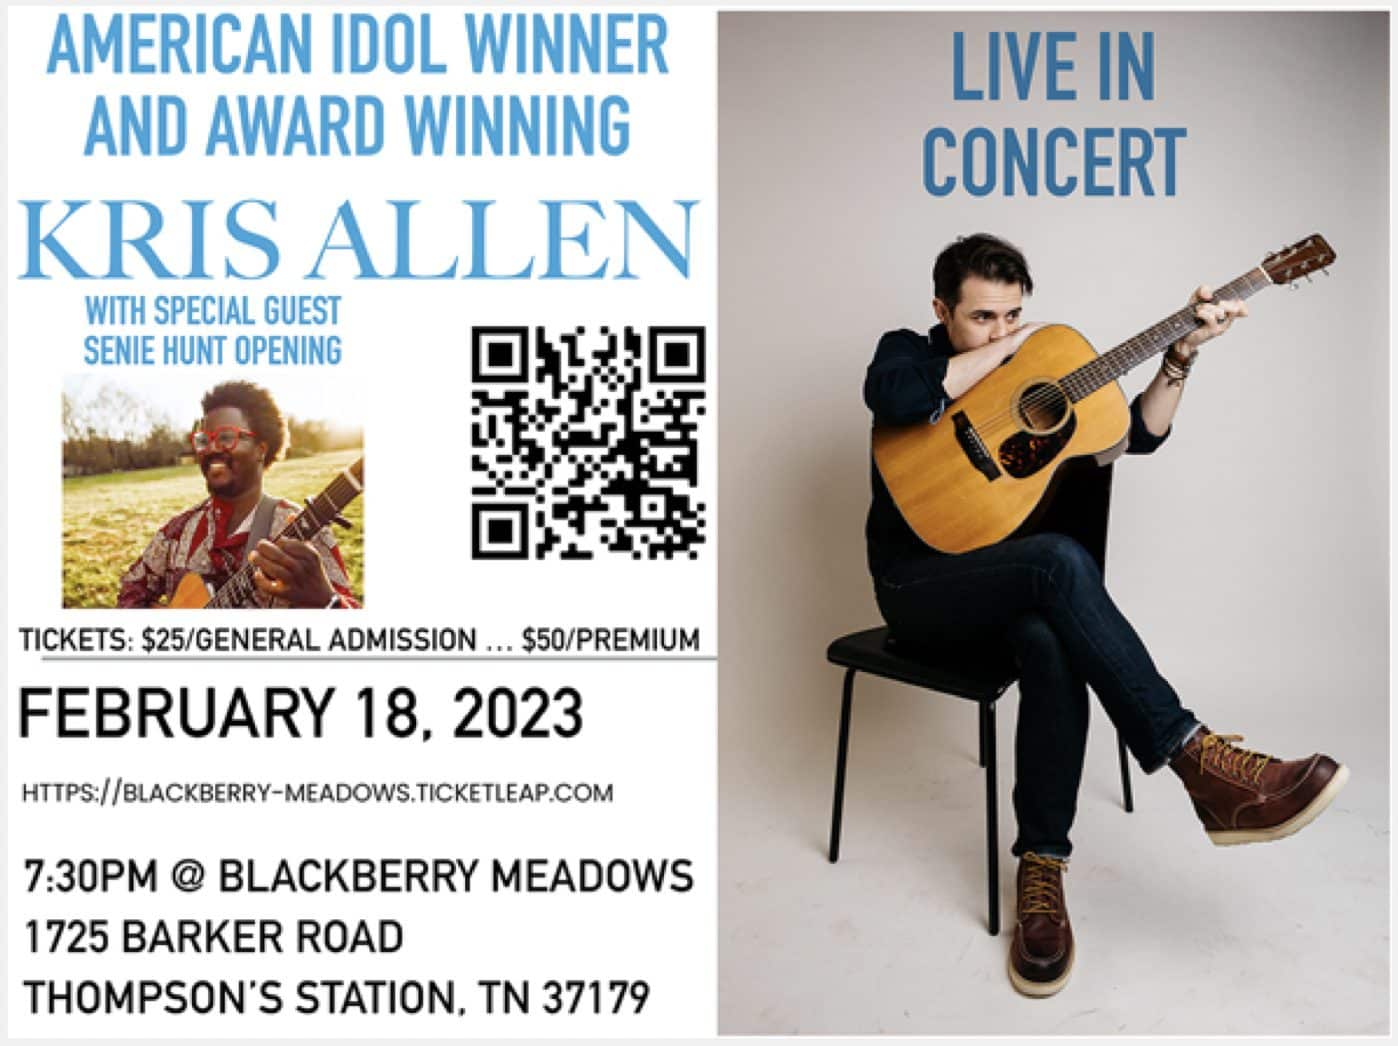 American Idol & Award Winner Kris Allen and Senie hunt live event in Thompson's Station, Tennessee